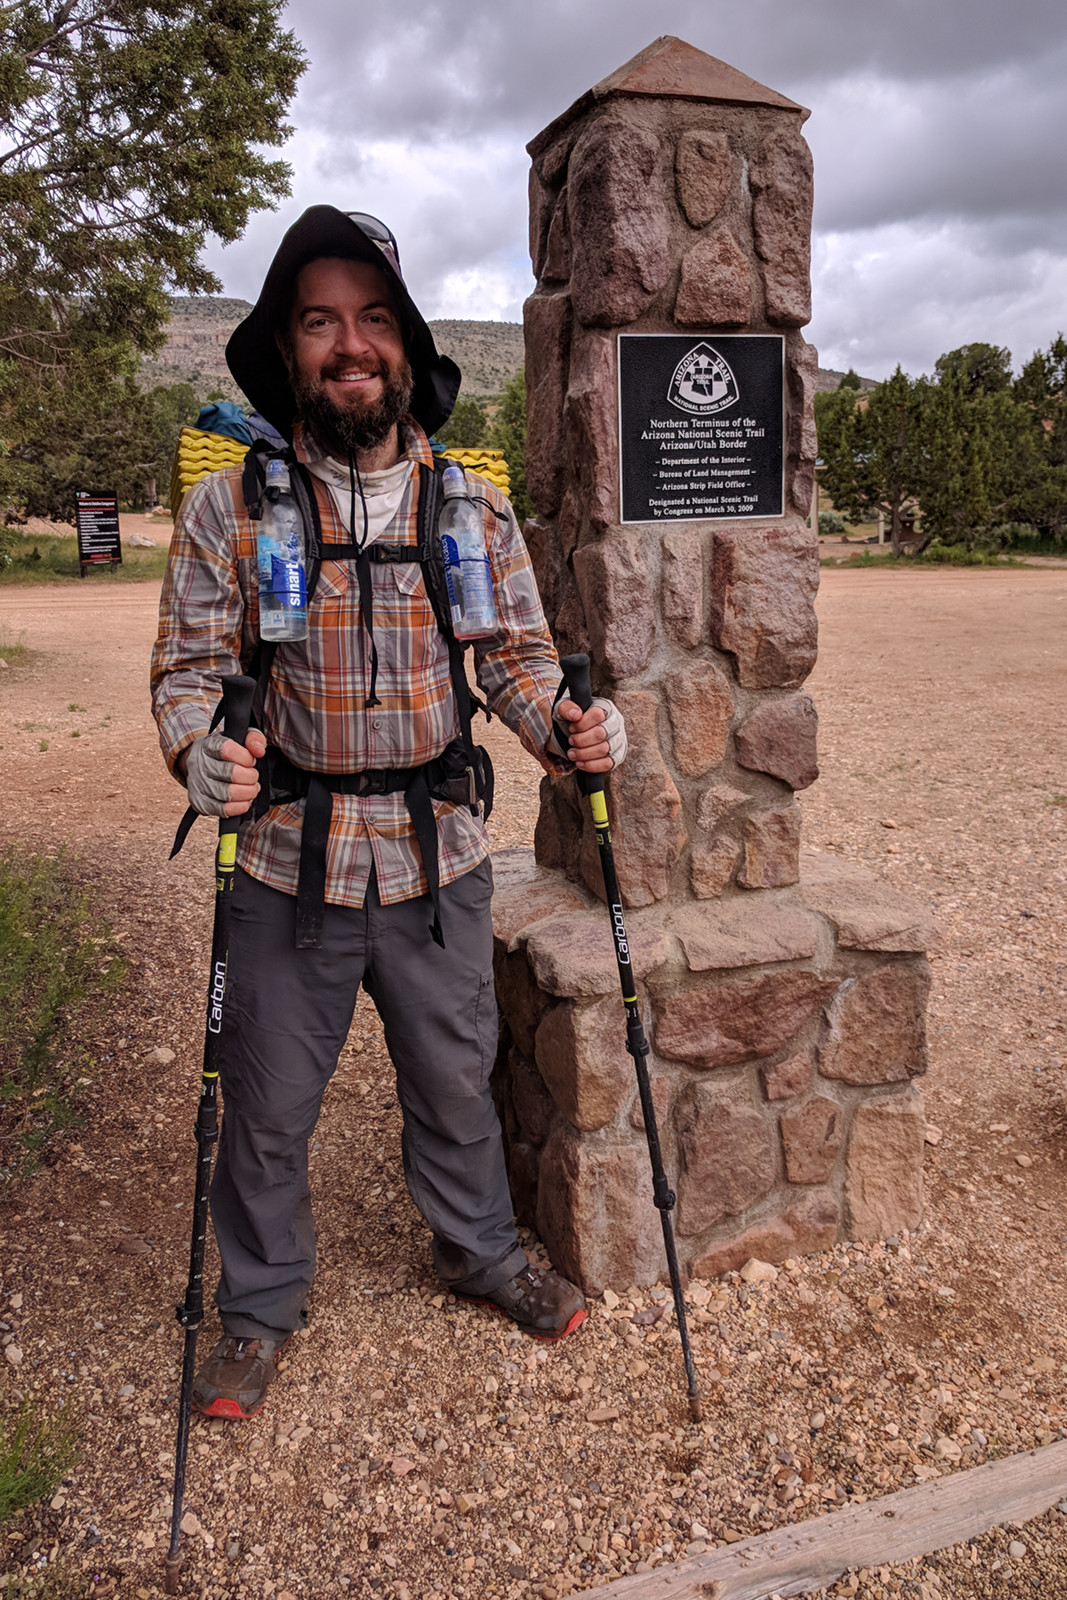 Justin at the northern terminus of the Arizona trail after hiking for 53 days